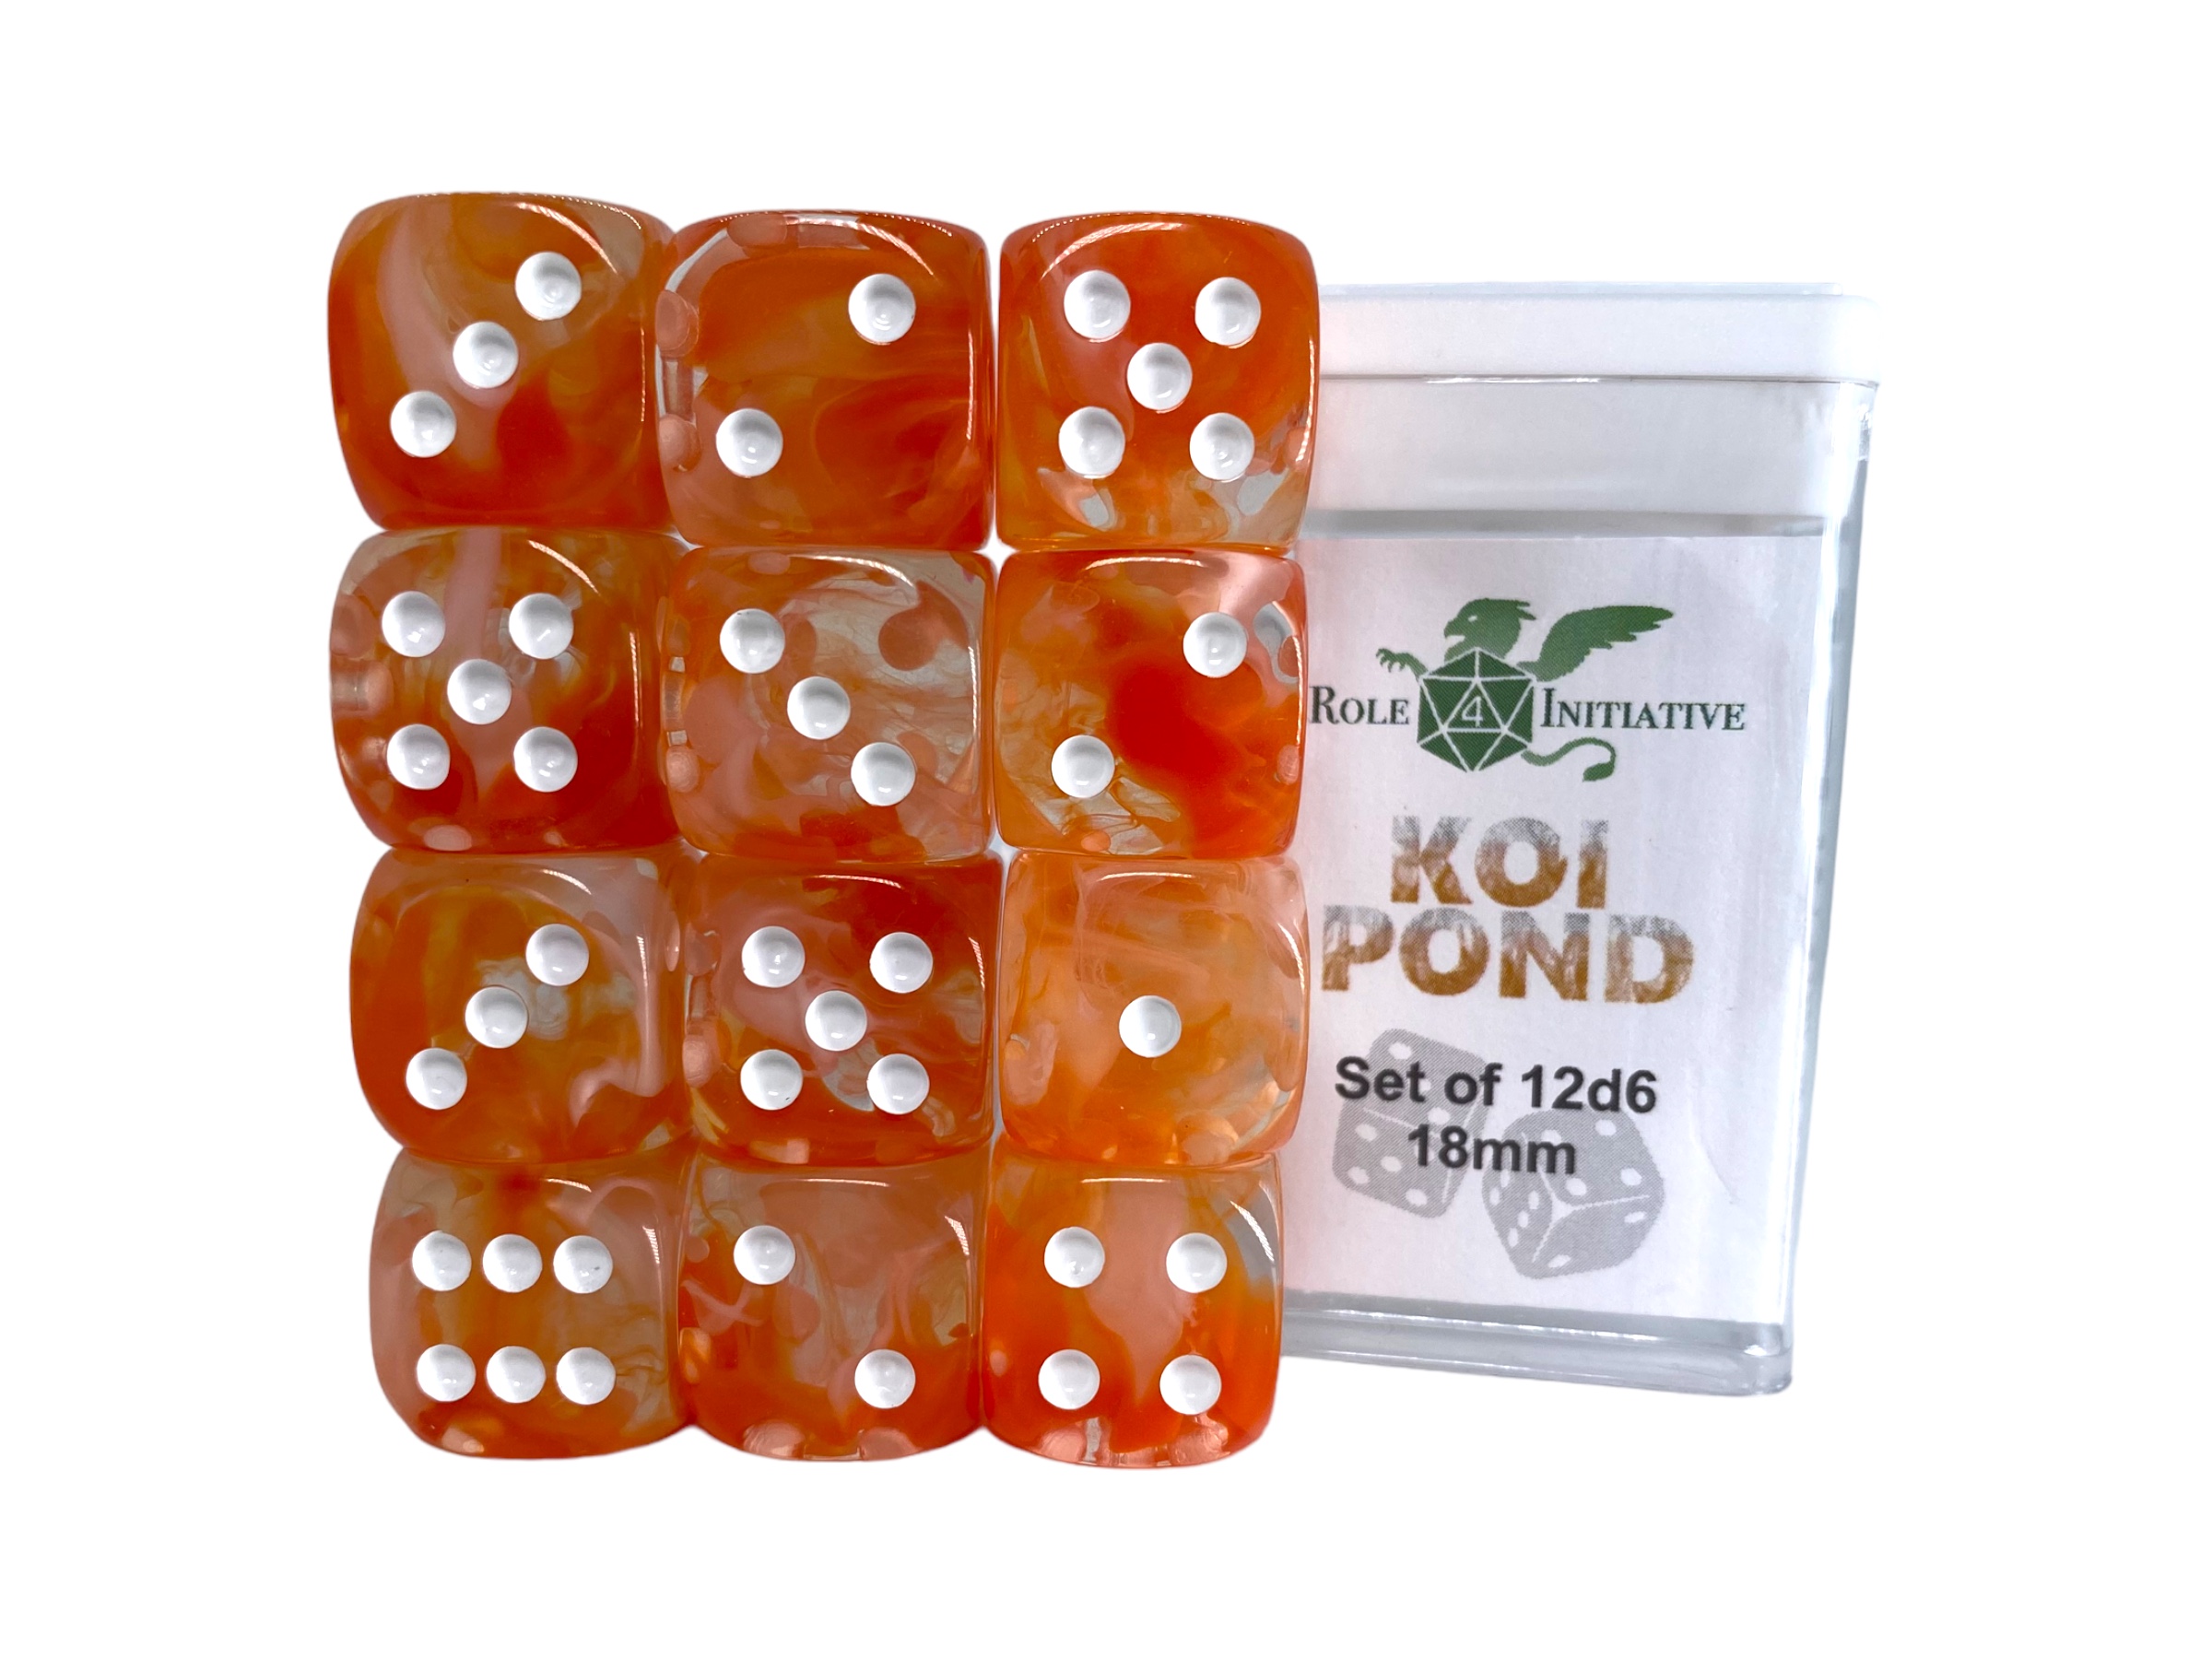 Role 4 Initiative: 12 D6 Pips Dice Set: Diffusion Koi Pond 18MM 